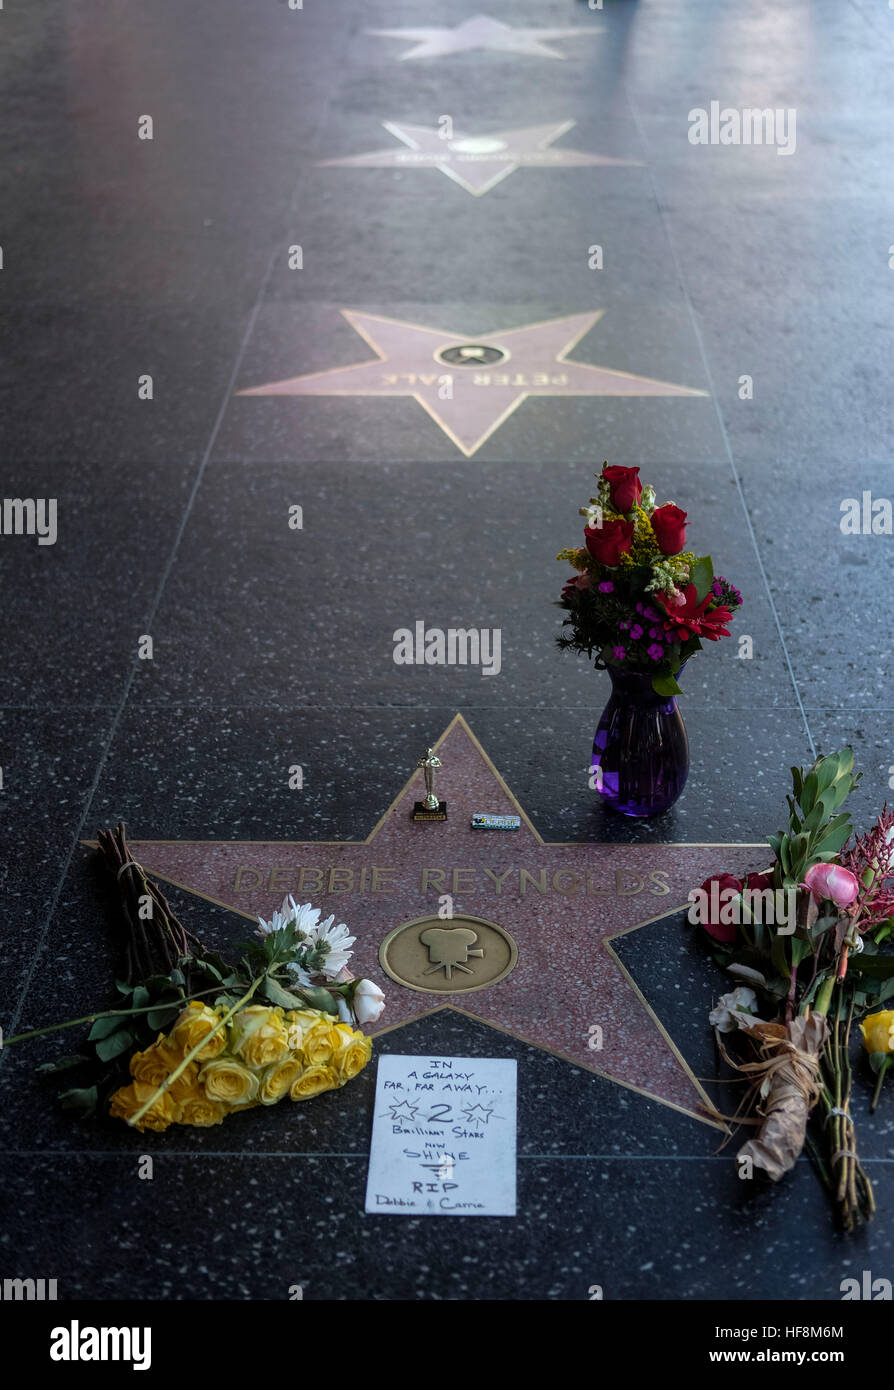 Los Angeles, USA. 29th Dec, 2016. Flowers and candles surround the Hollywood Walk of Fame star of Debbie Reynolds, in Los Angeles, California, the United States, on Dec. 29, 2016. Hollywood star Debbie Reynolds died of stroke Wednesday at the age of 84, one day after her daughter Carrie Fisher's death. Carrie Fisher, the actress best known as Princess Leia in the 'Star Wars' movie franchise, died at the age of 60 on Tuesday morning, after suffering a heart attack on a flight last Friday. © Zhao Hanrong/Xinhua/Alamy Live News Stock Photo